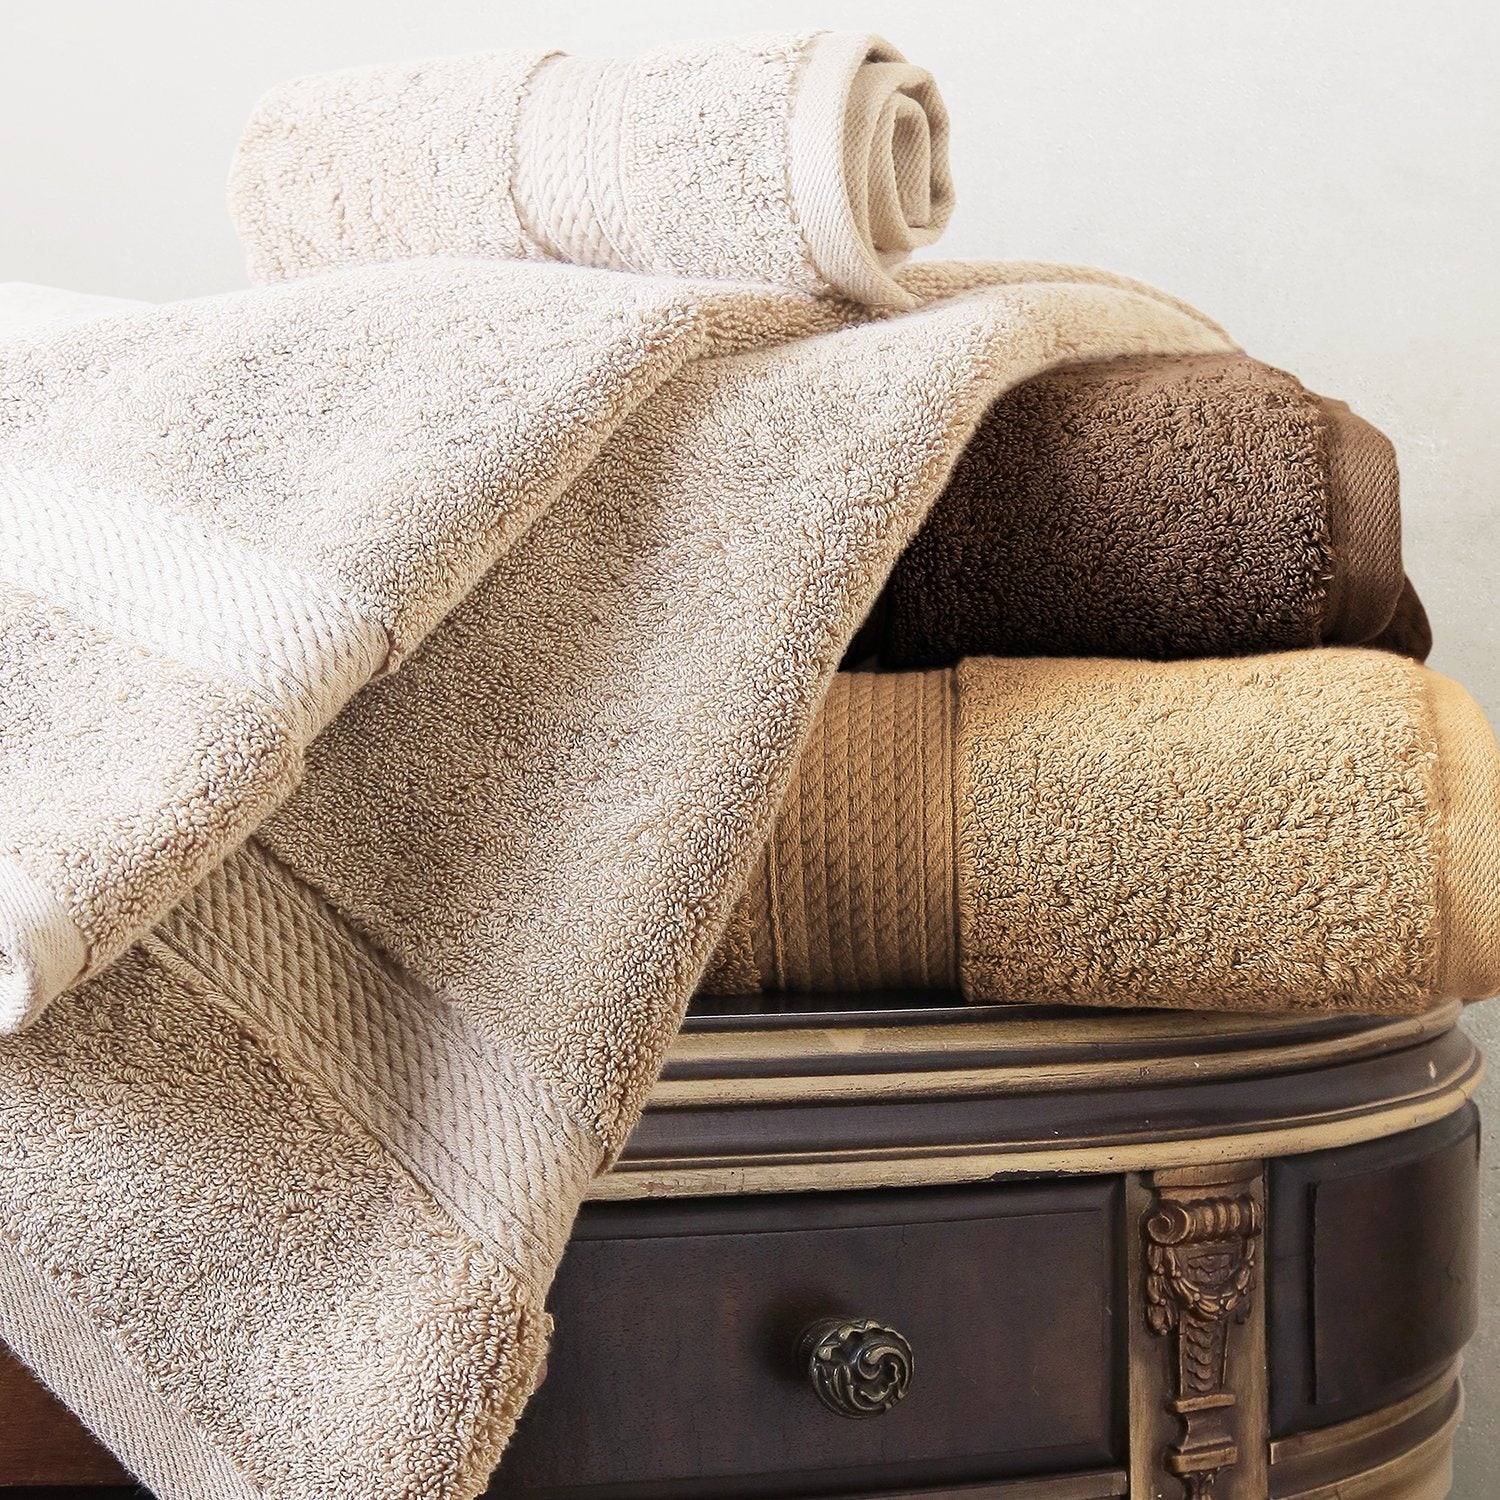  lvse- 1 Pack Luxury Oversized Euro Bath Towel-Brown- 100%  Egyptian Long-Staple Cotton- 80x150cm-609GSM- Thick Fluffy Soft Absorbent  for Bathroom Daily (Pack of 1, 80x150cm,730g, Brown) : Home & Kitchen